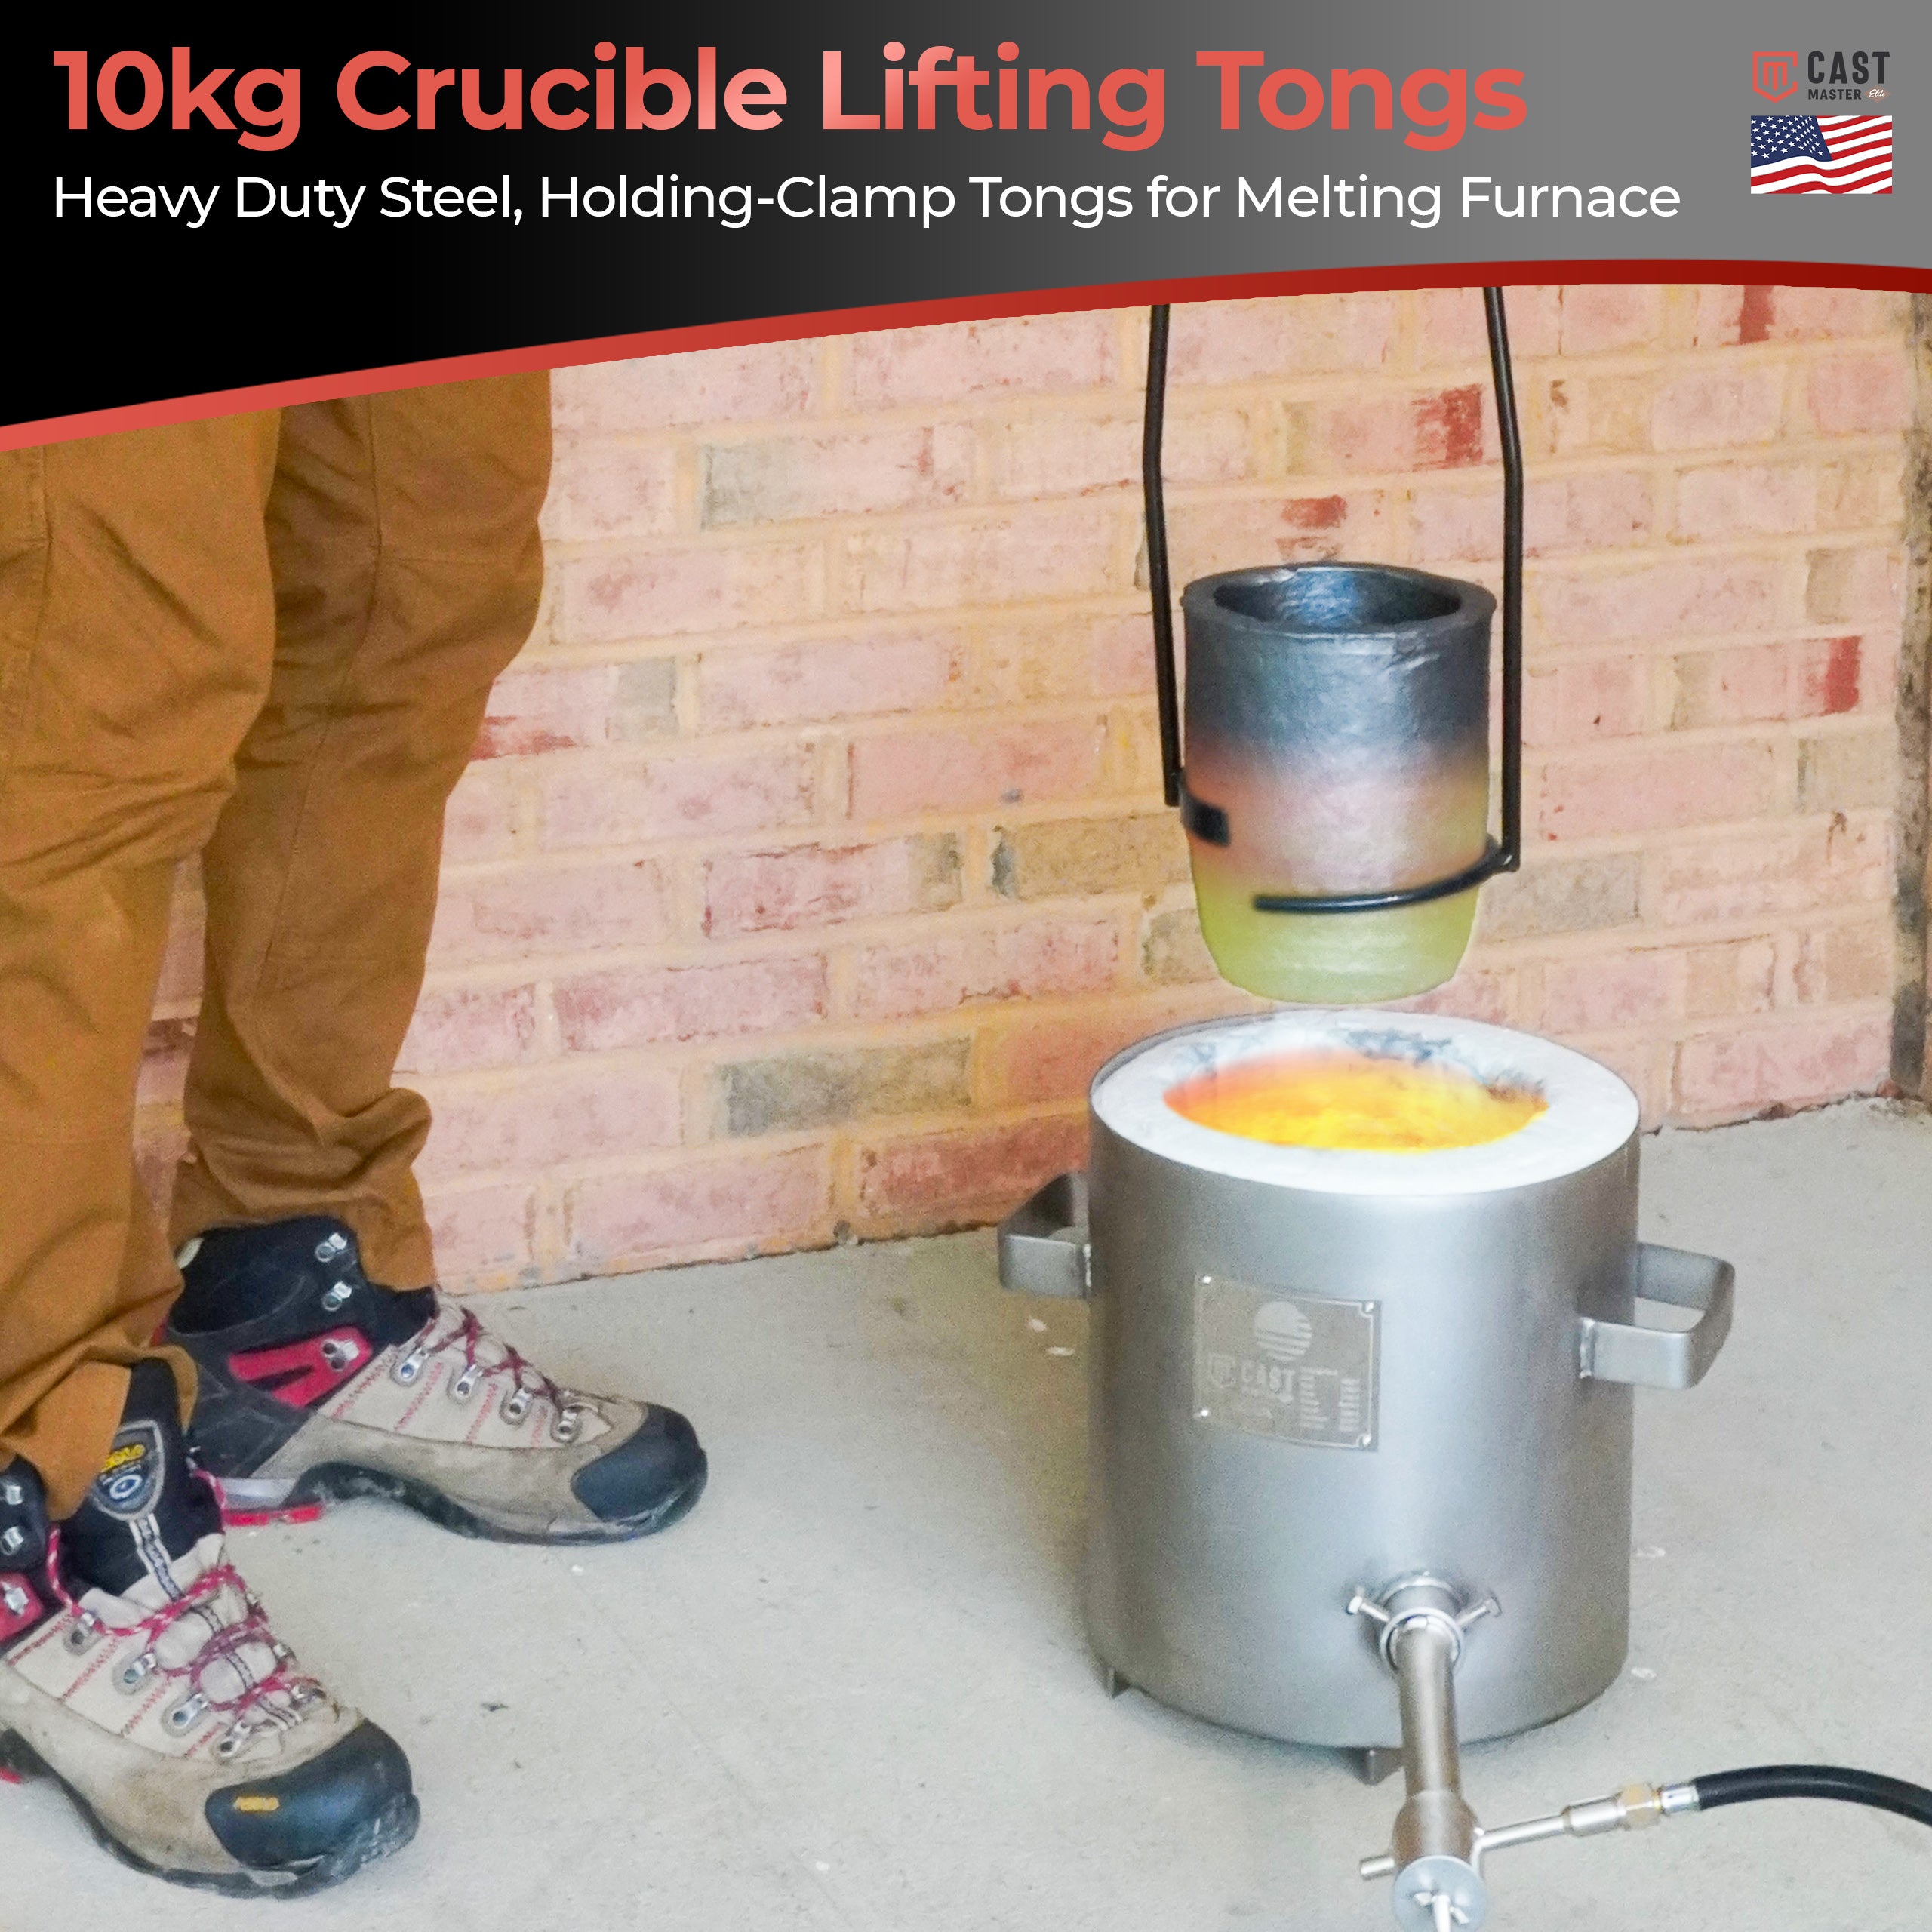 4KG-8 KG Crucible Tongs for Lifting and Pouring Gas Melting Furnace Casting  tool